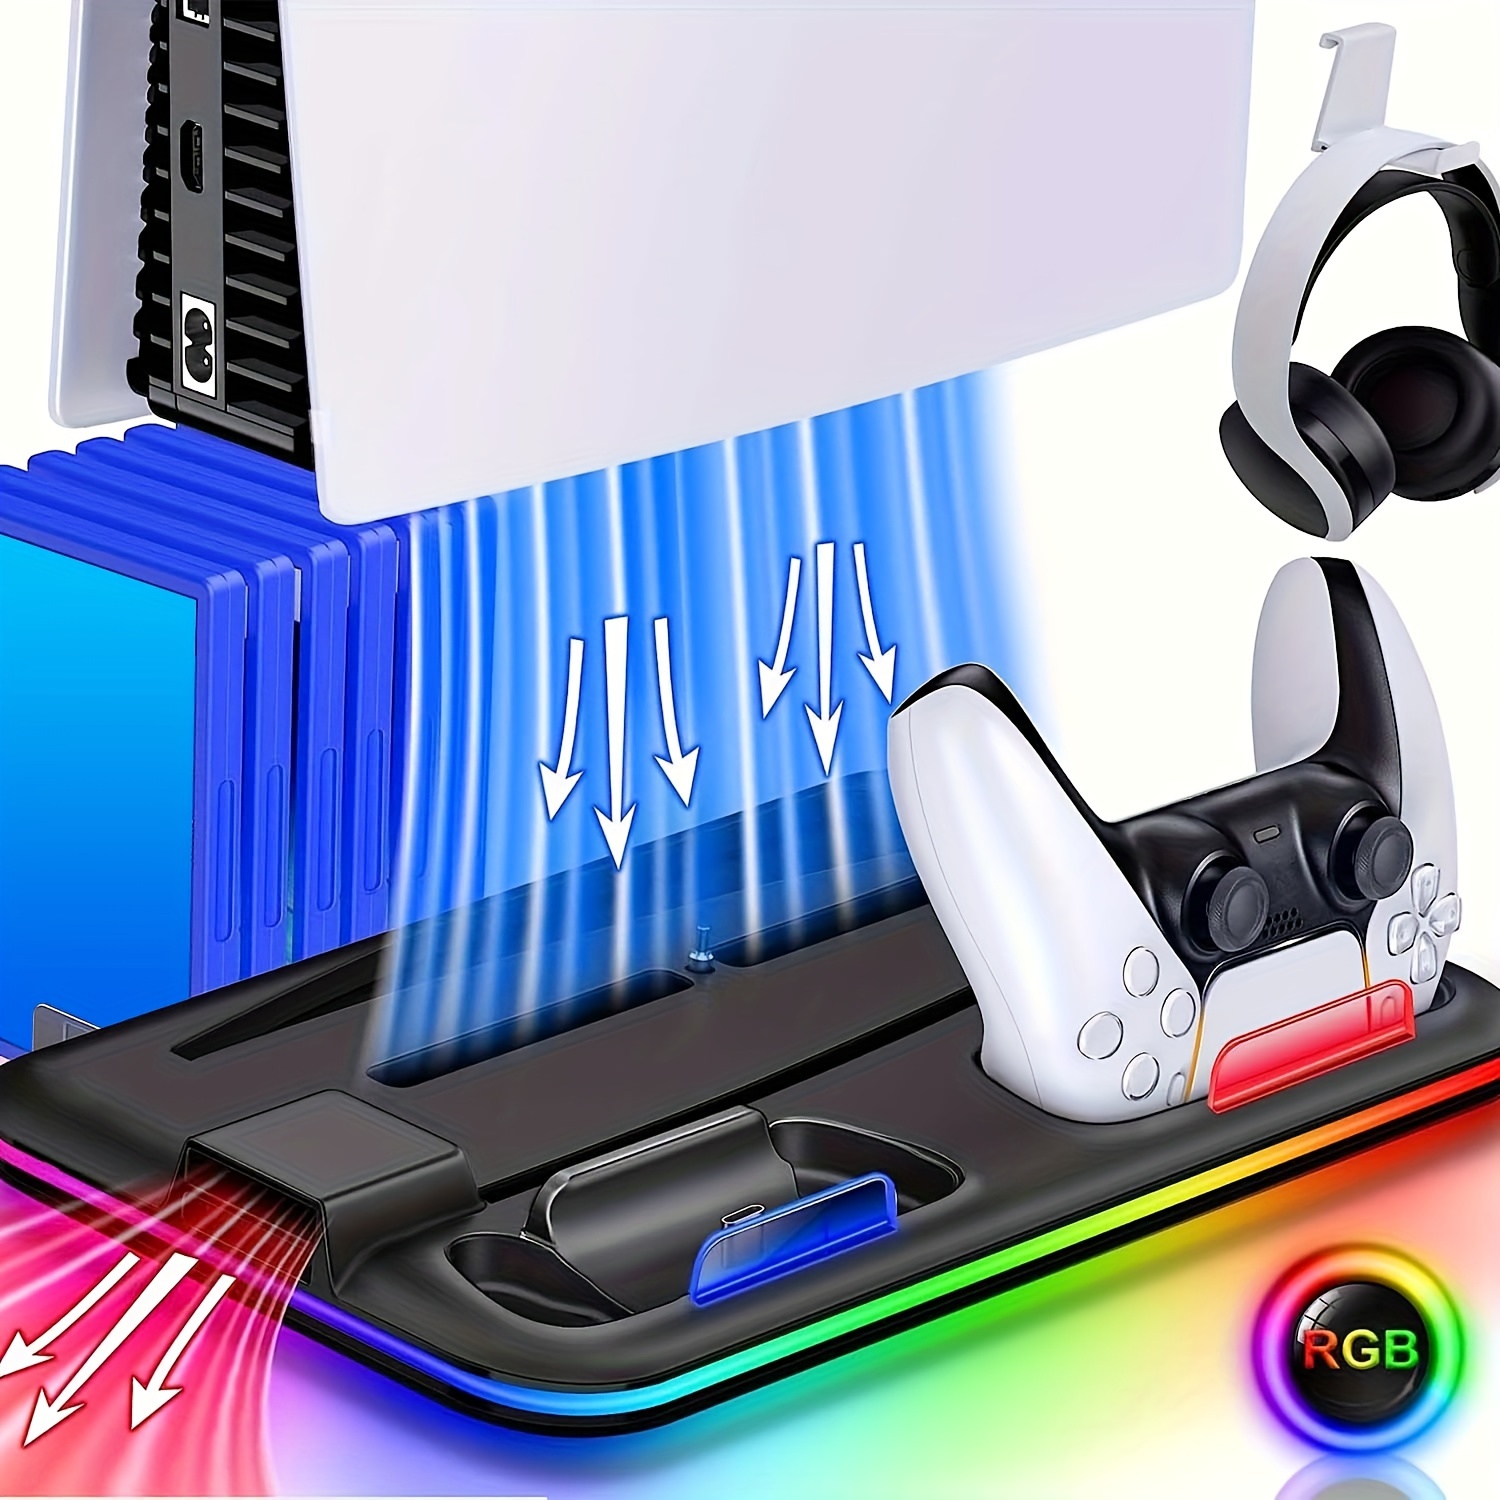 

For Ps5 Stand Cooling Station With Dual Ps5 Controller Charging Station, Ps5 Stand And Turbo Cooling Station, 3 Levels Cooling Fan, Rgb Led, 6 Game Slots, Headset Holder For /disc